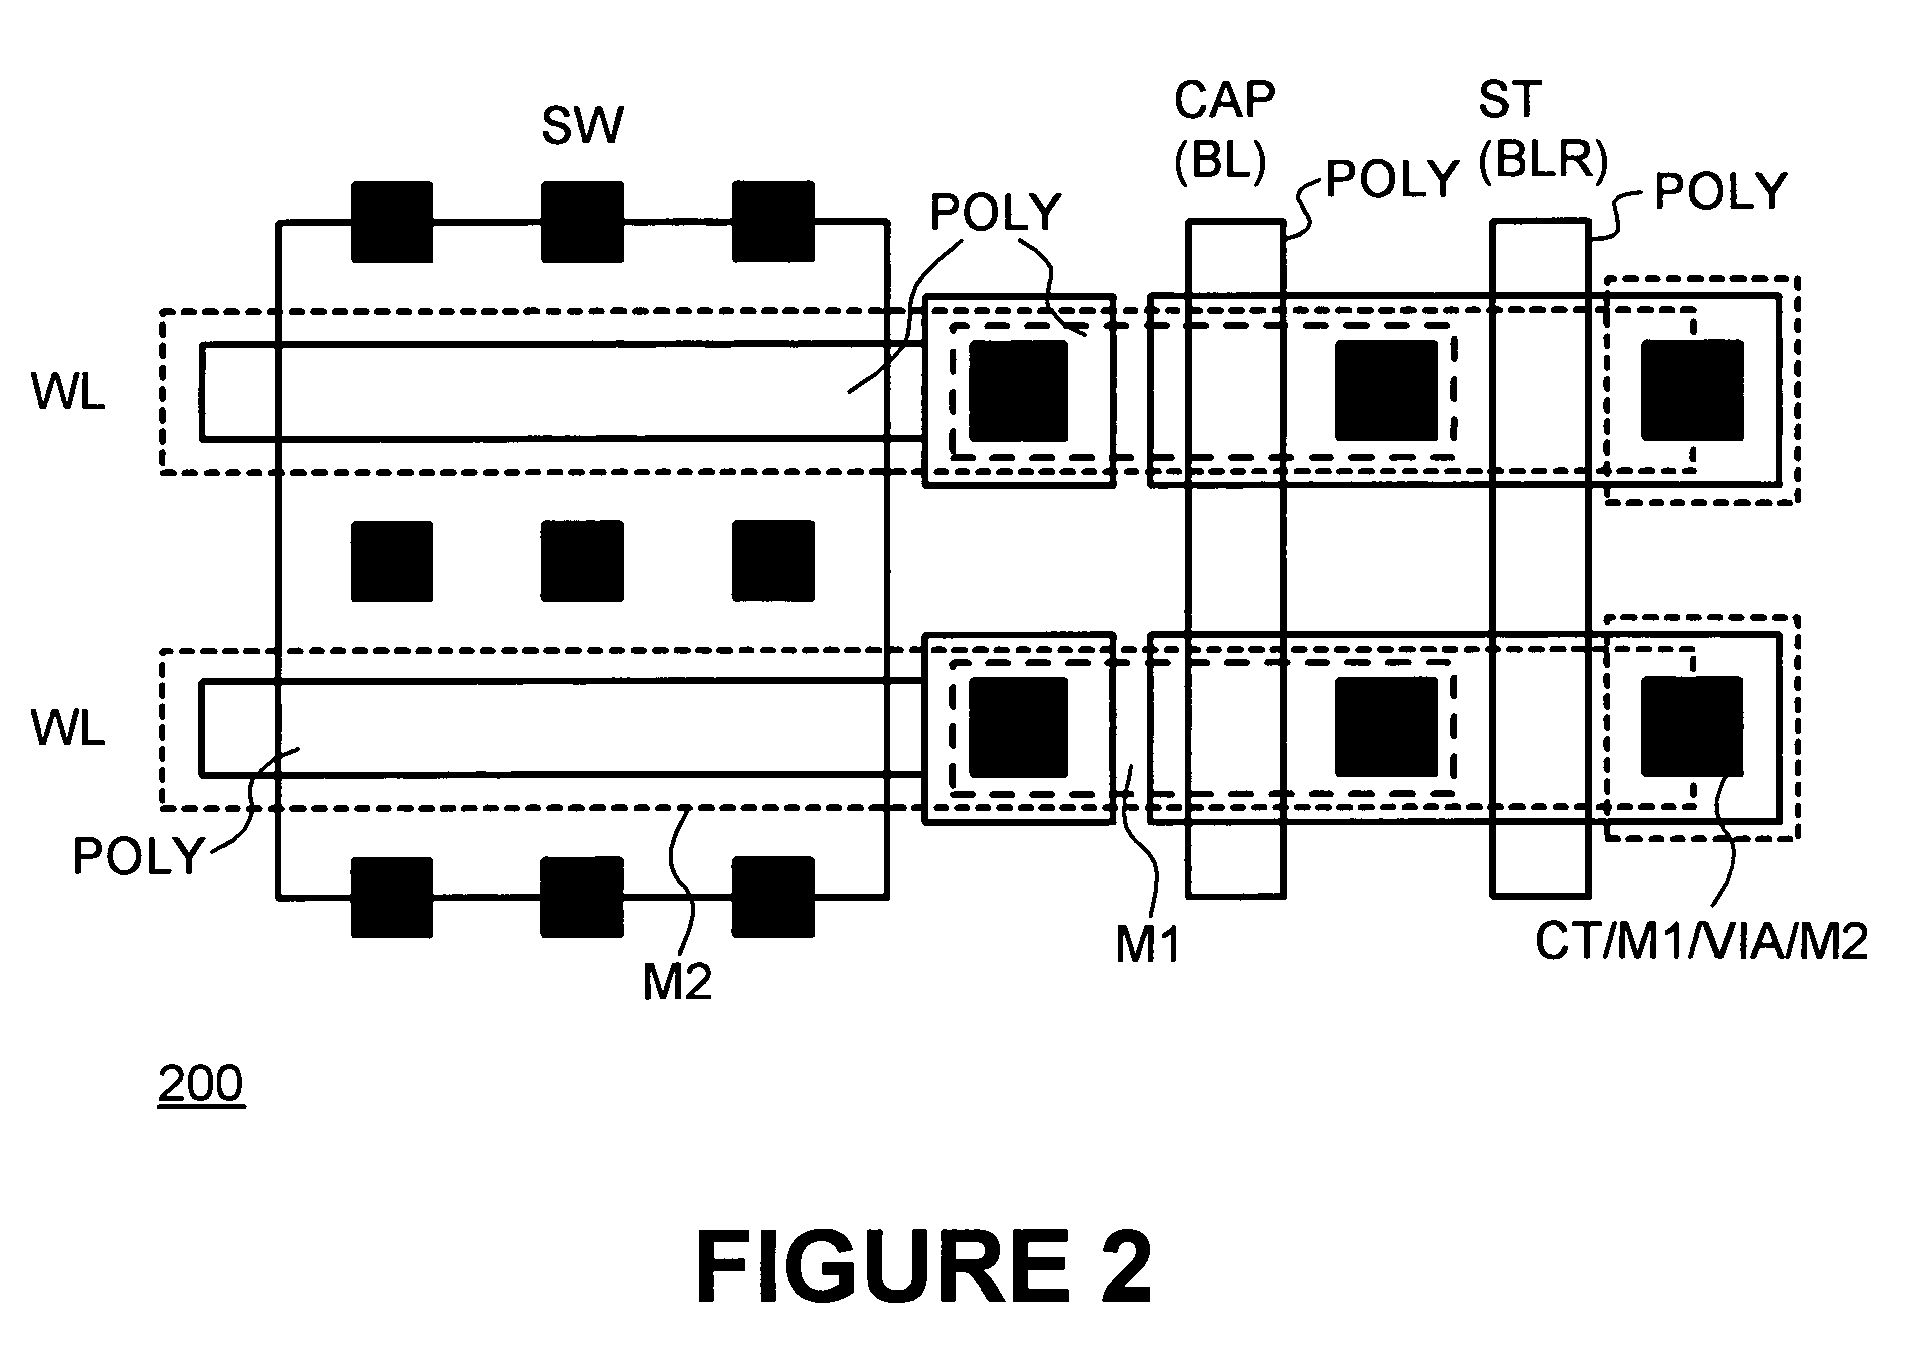 Combination field programmable gate array allowing dynamic reprogrammability and non-votatile programmability based upon transistor gate oxide breakdown